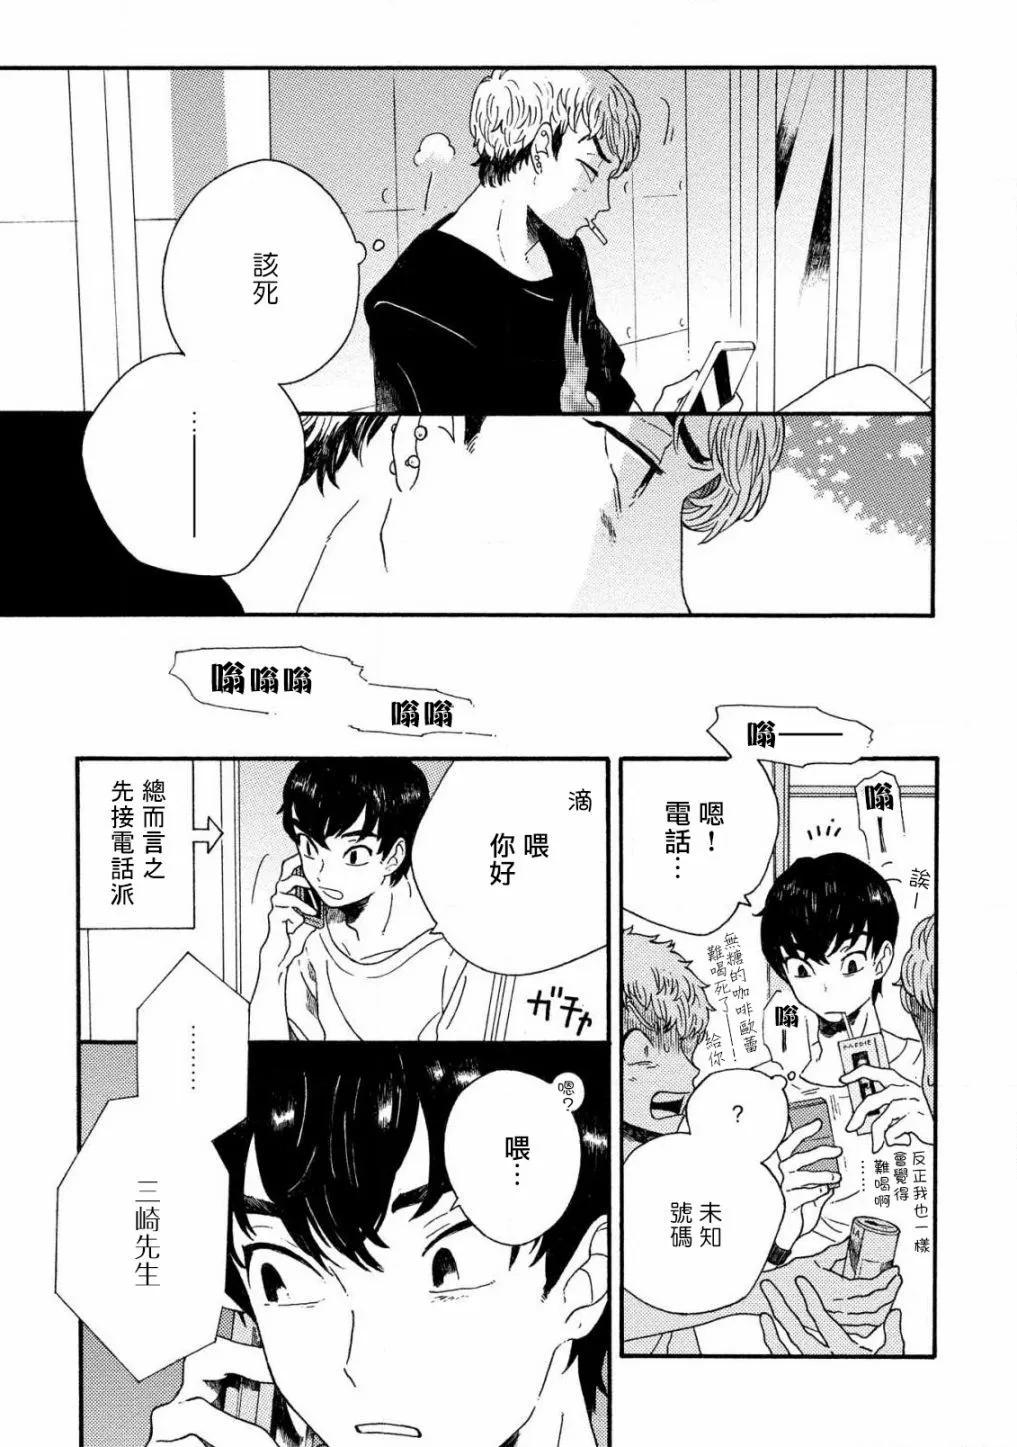 Sneaky Red - 第02話 - 1